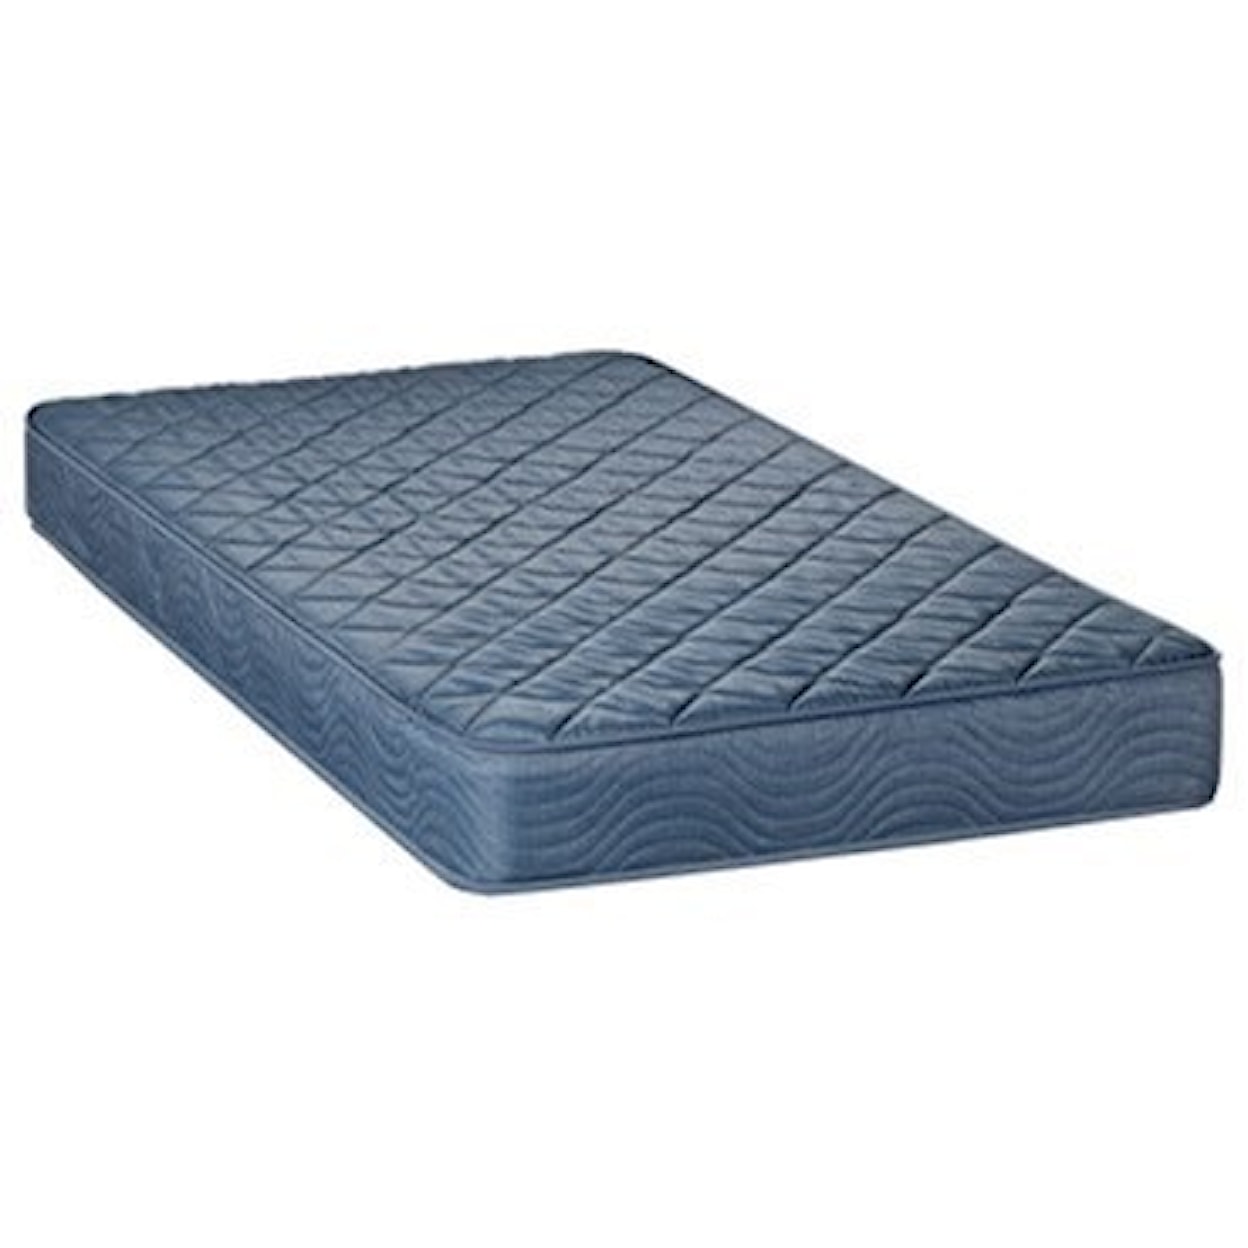 Restonic Charles II Queen Pocketed Coil Mattress